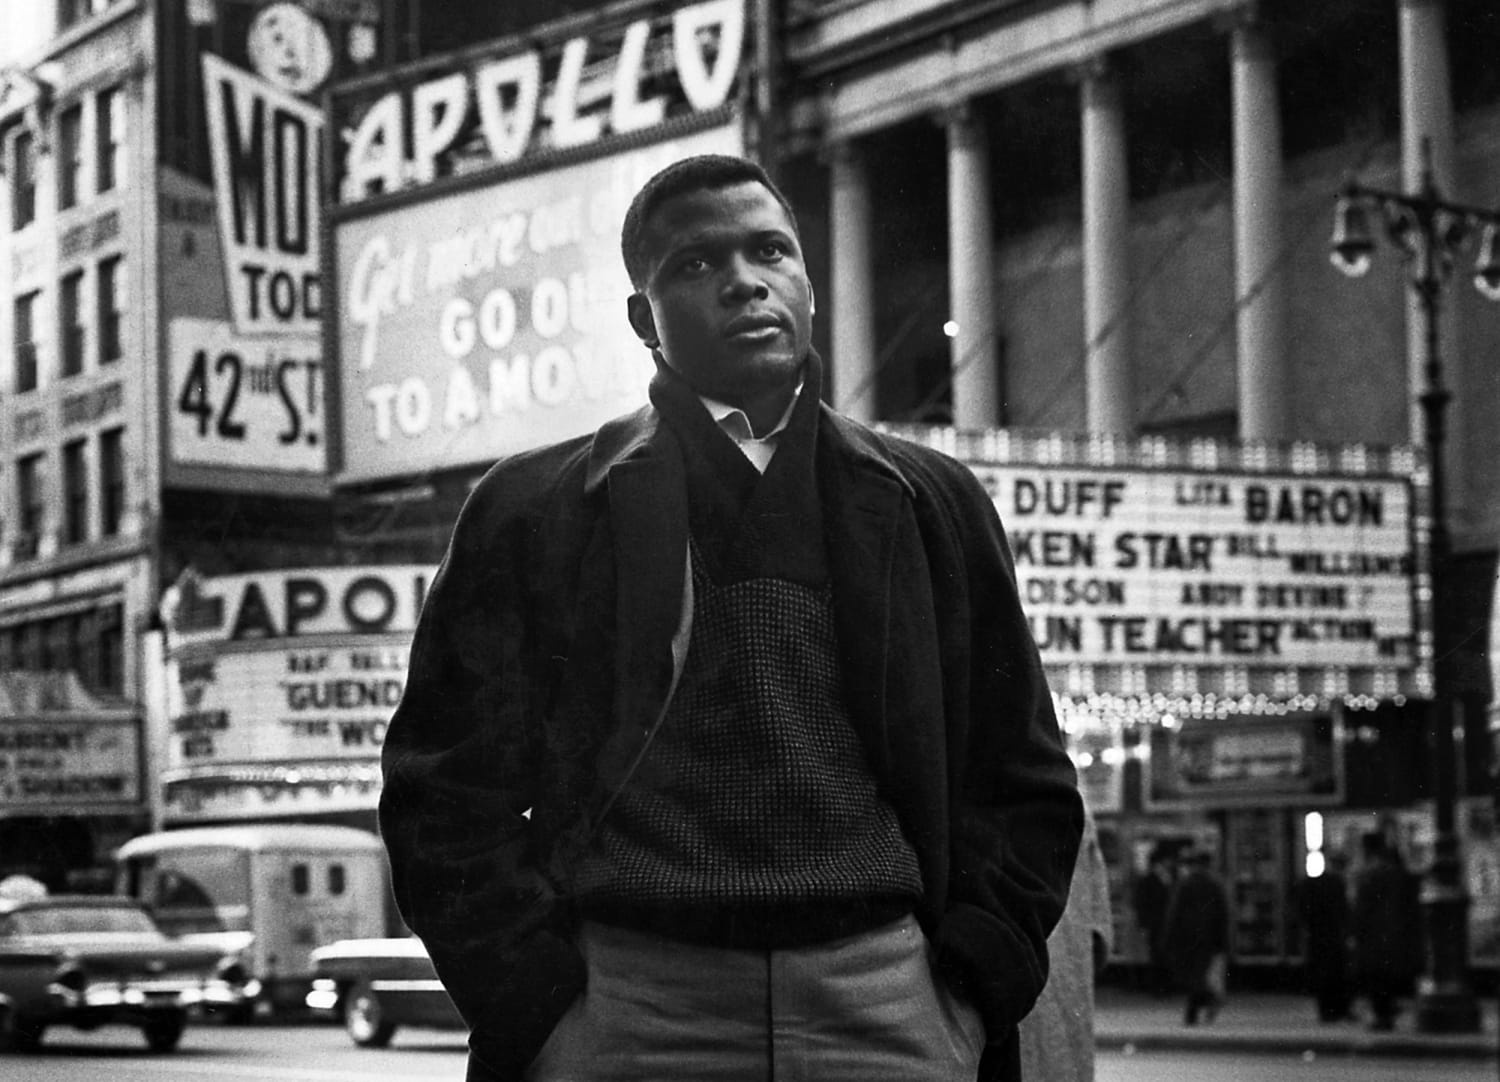 Sidney Poitier changed Blackness in the eyes of a generation of Black people